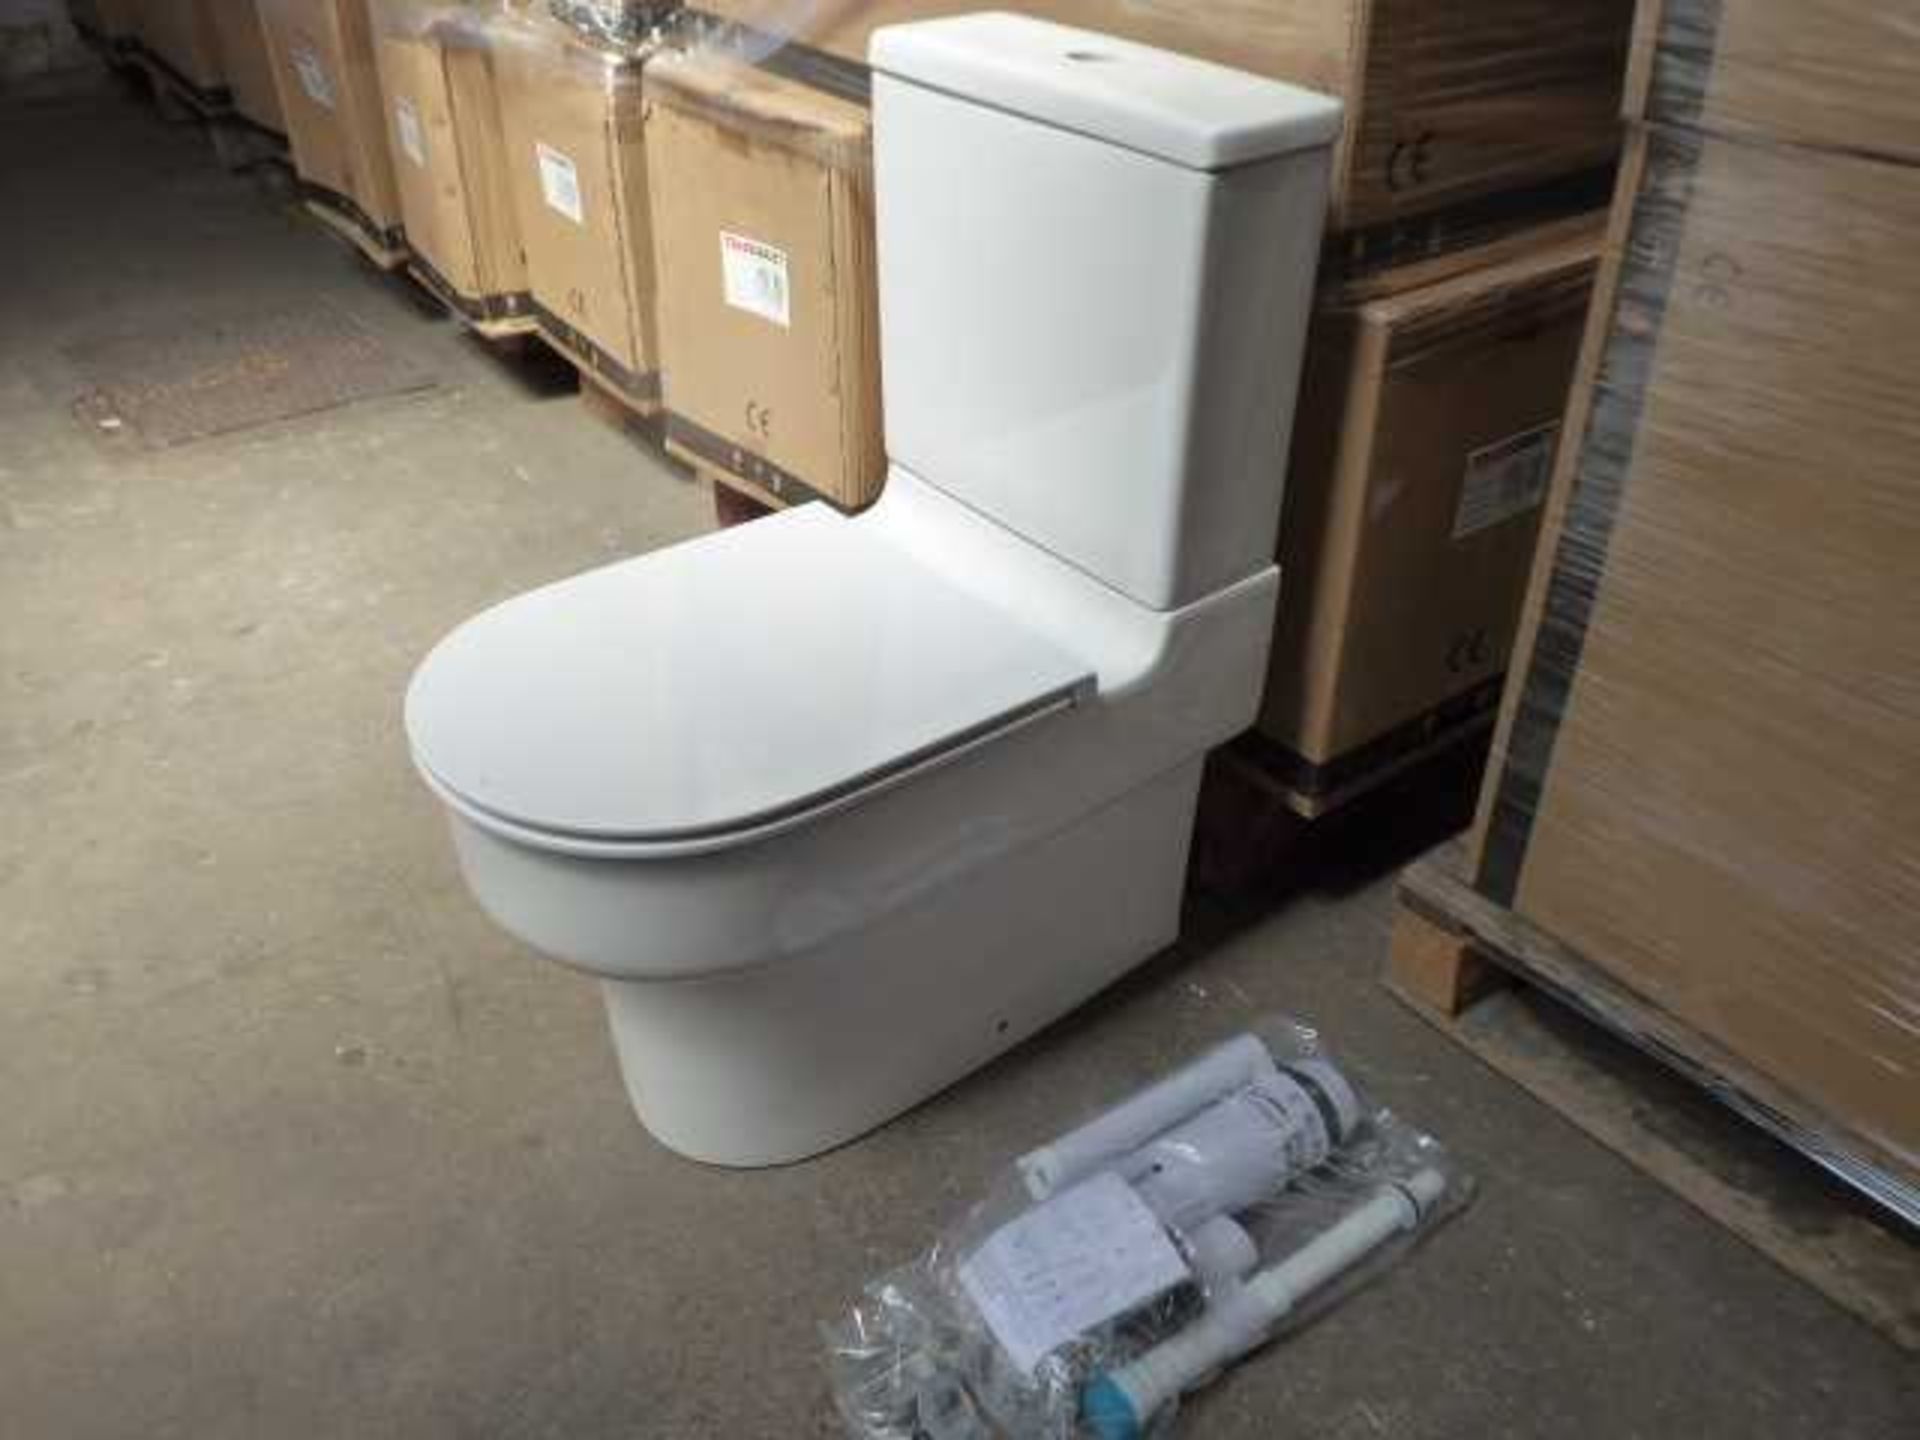 +VAT 15x ATL/ALT closed back close coupled toilet bowl with fixings, matching close coupled